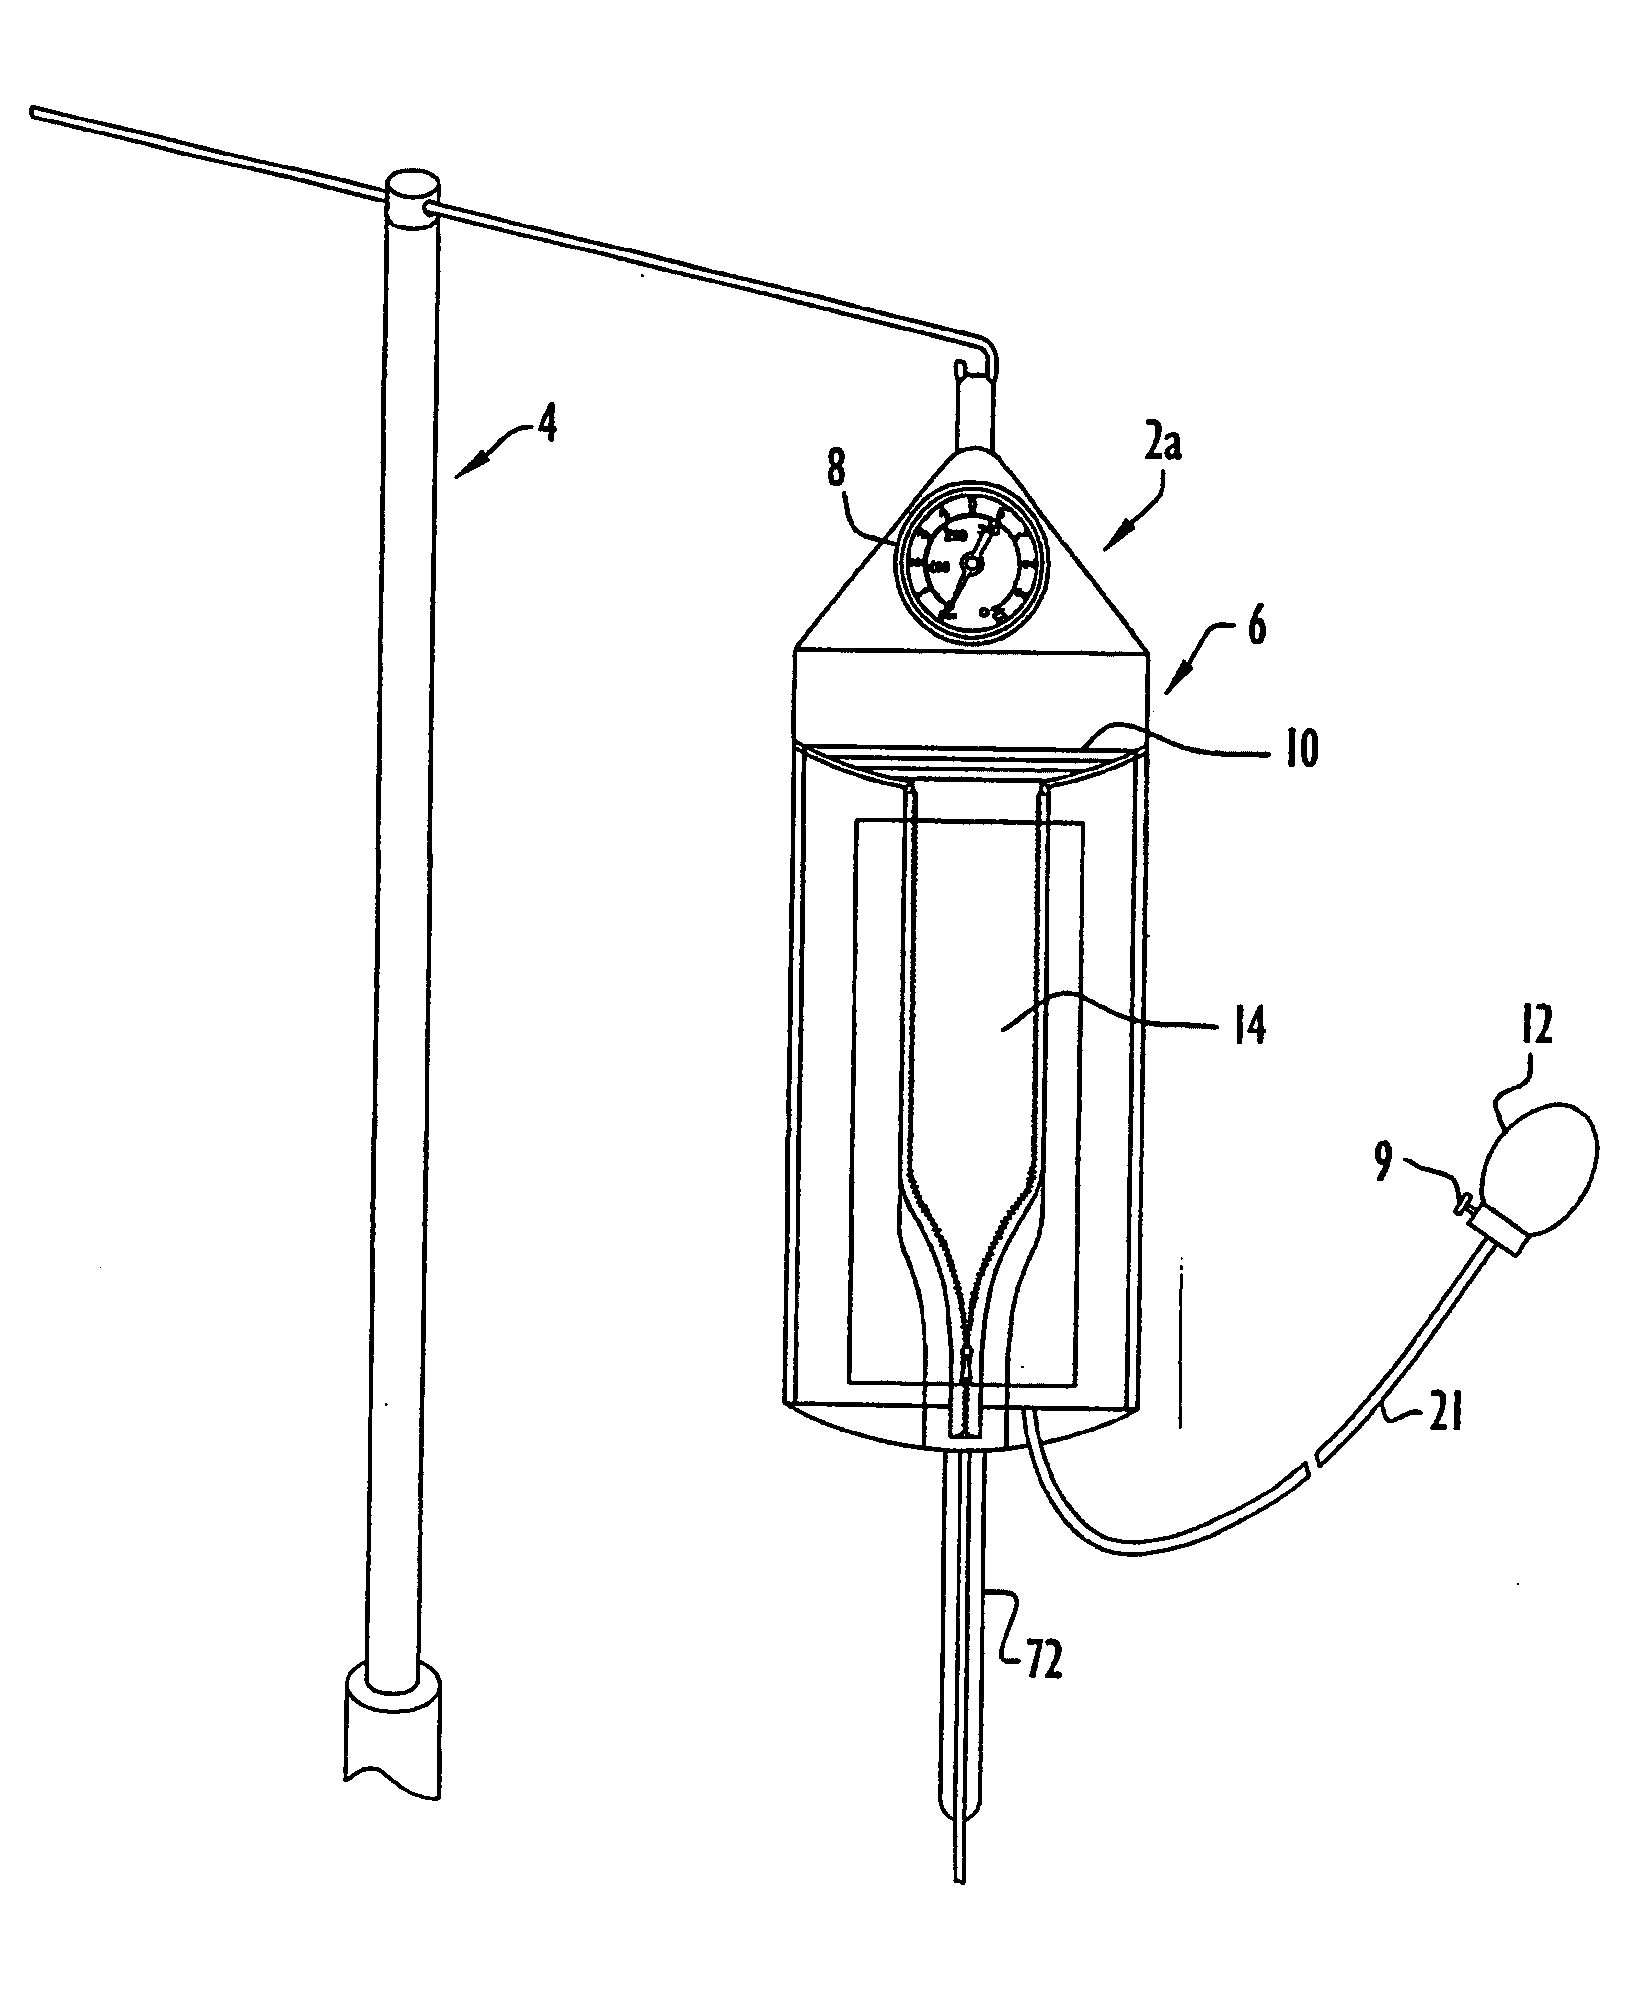 Method and Apparatus for Pressure Infusion and Temperature Control of Infused Liquids